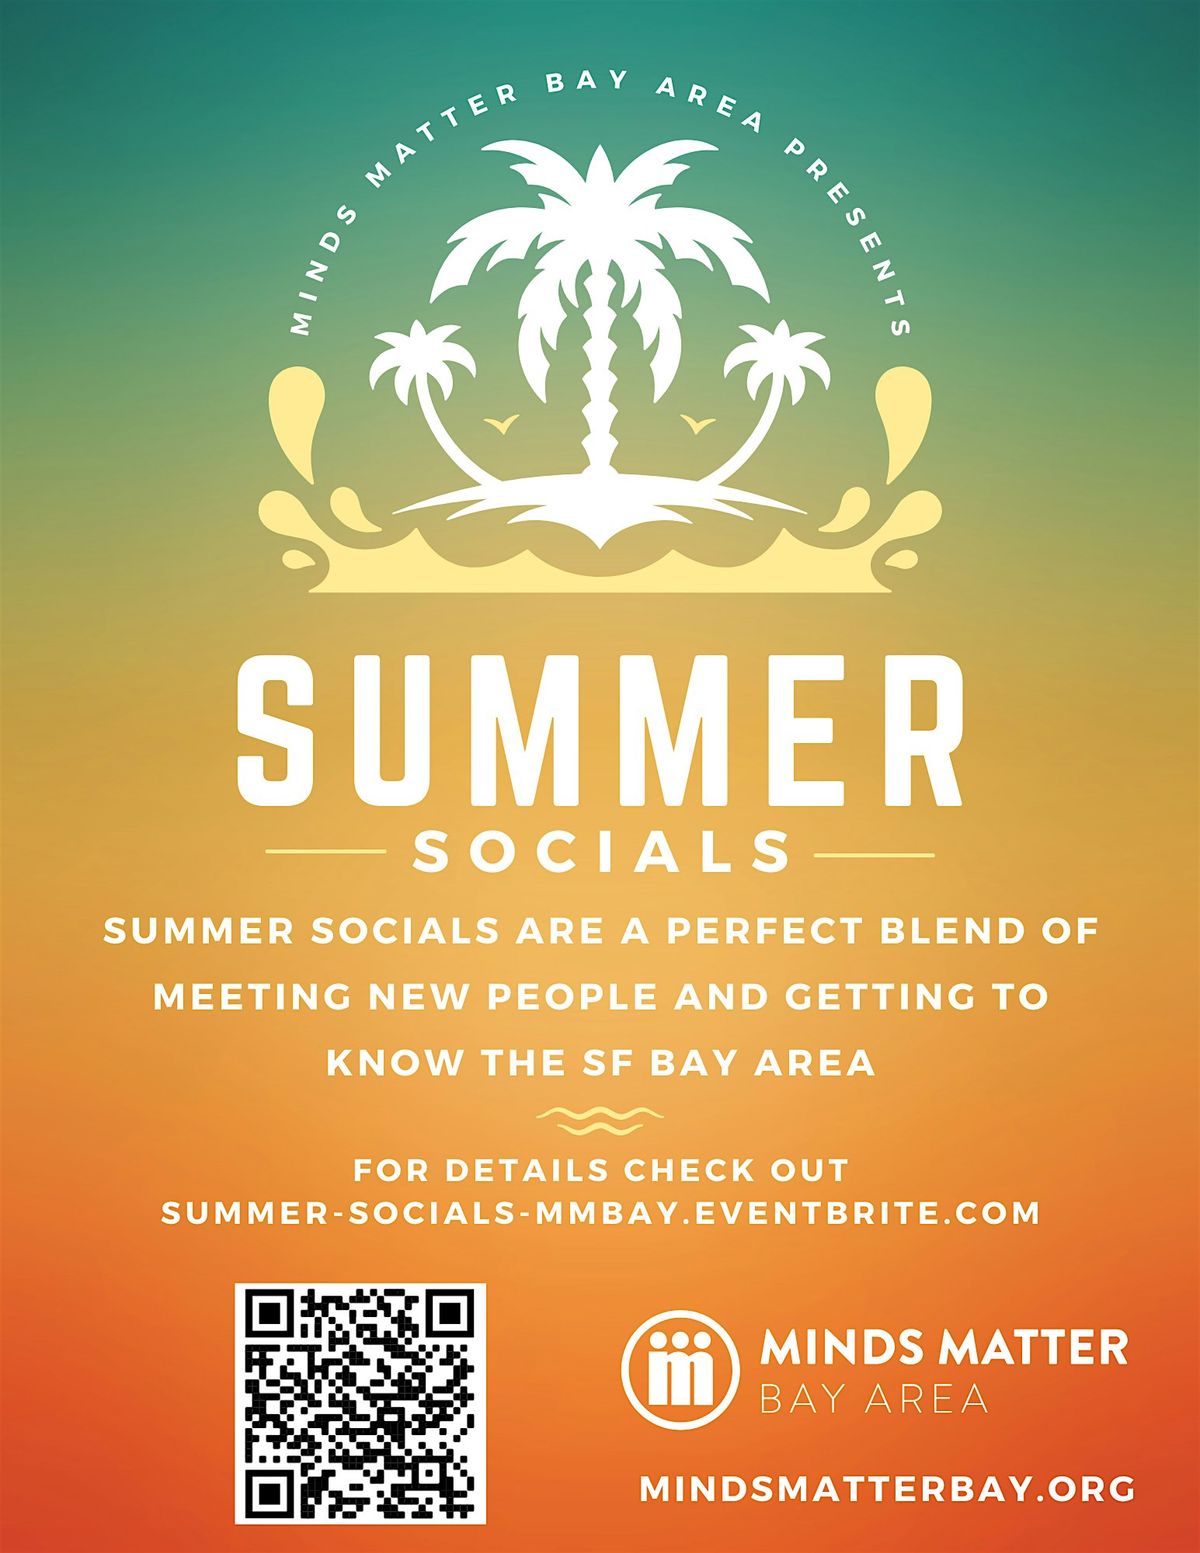 Summer Socials - Happy Hour @ Southern Pacific